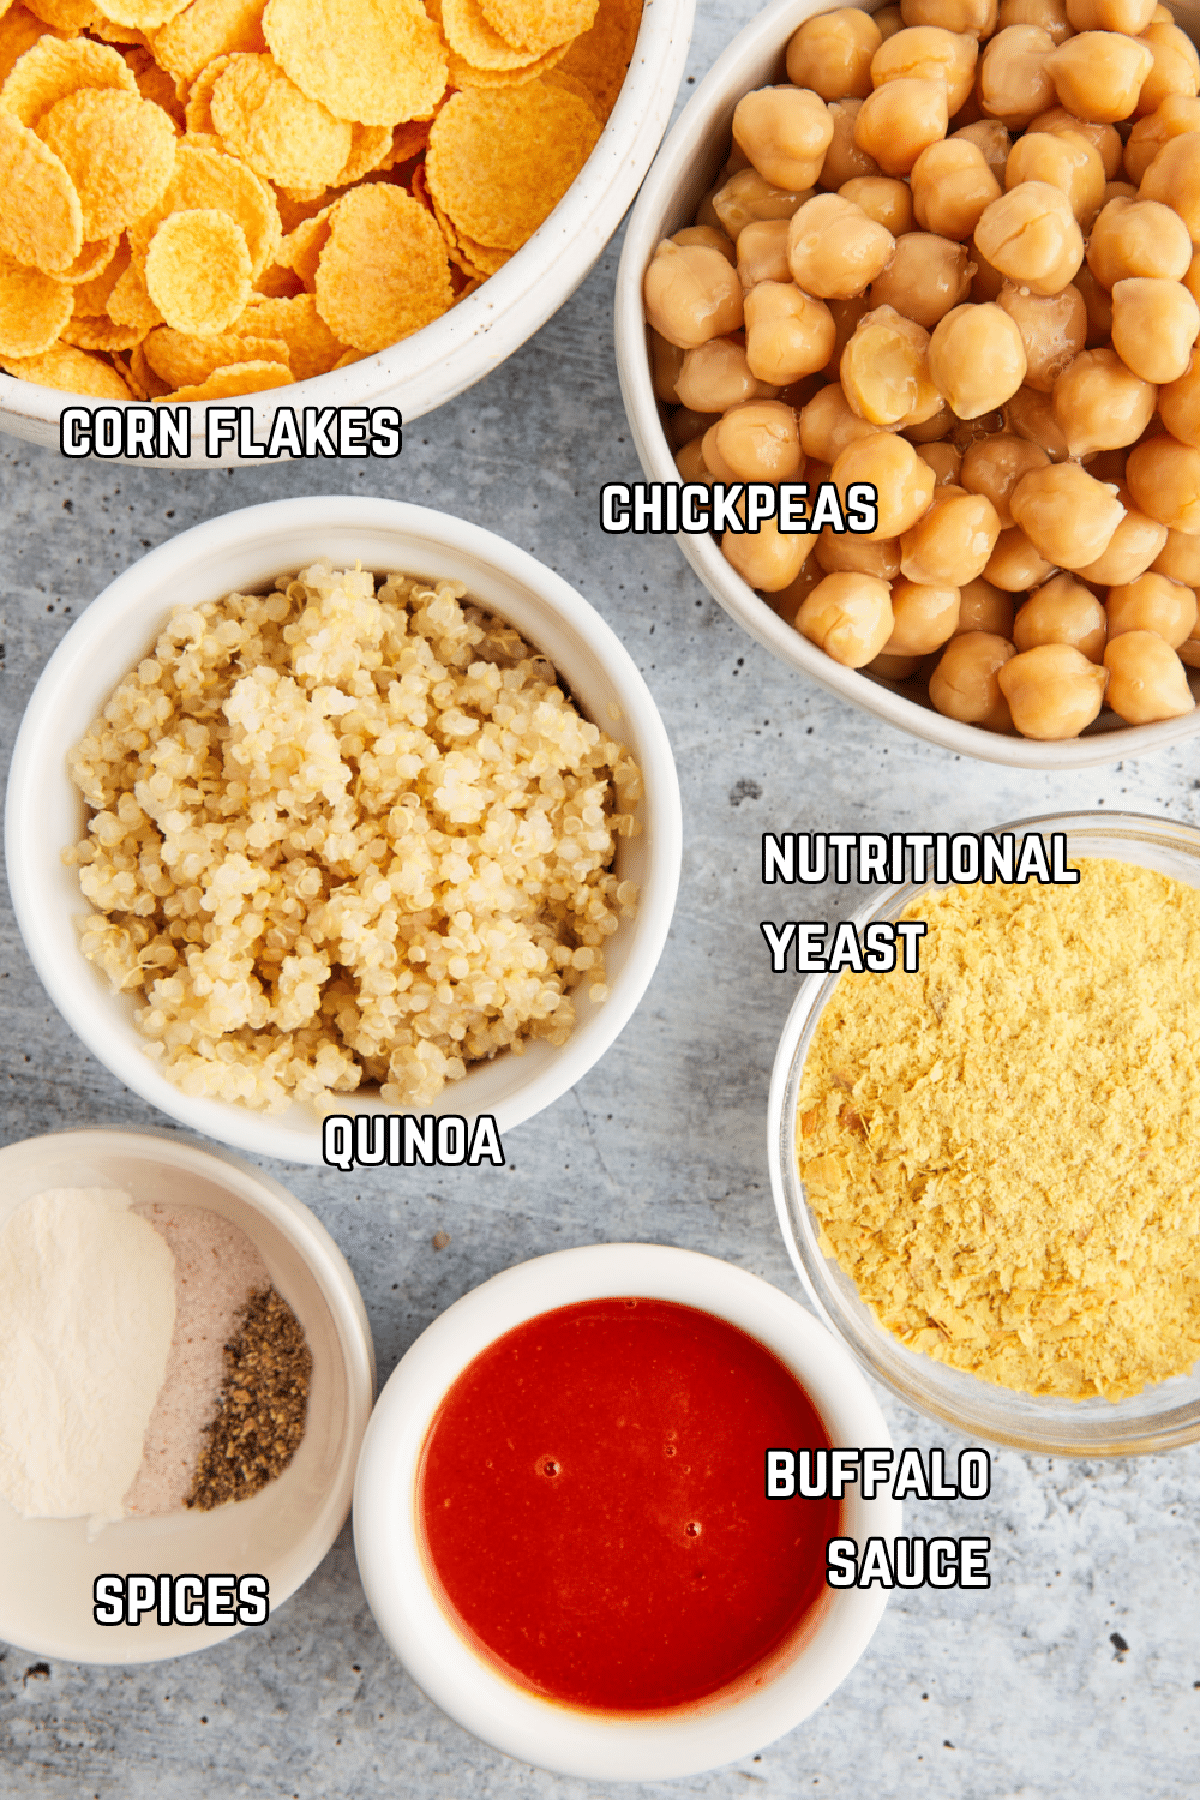 Overhead view of bowls of ingredients to make vegan wings: cornflakes, chickpeas, quinoa, nutritional yeast, buffalo sauce, and spices.